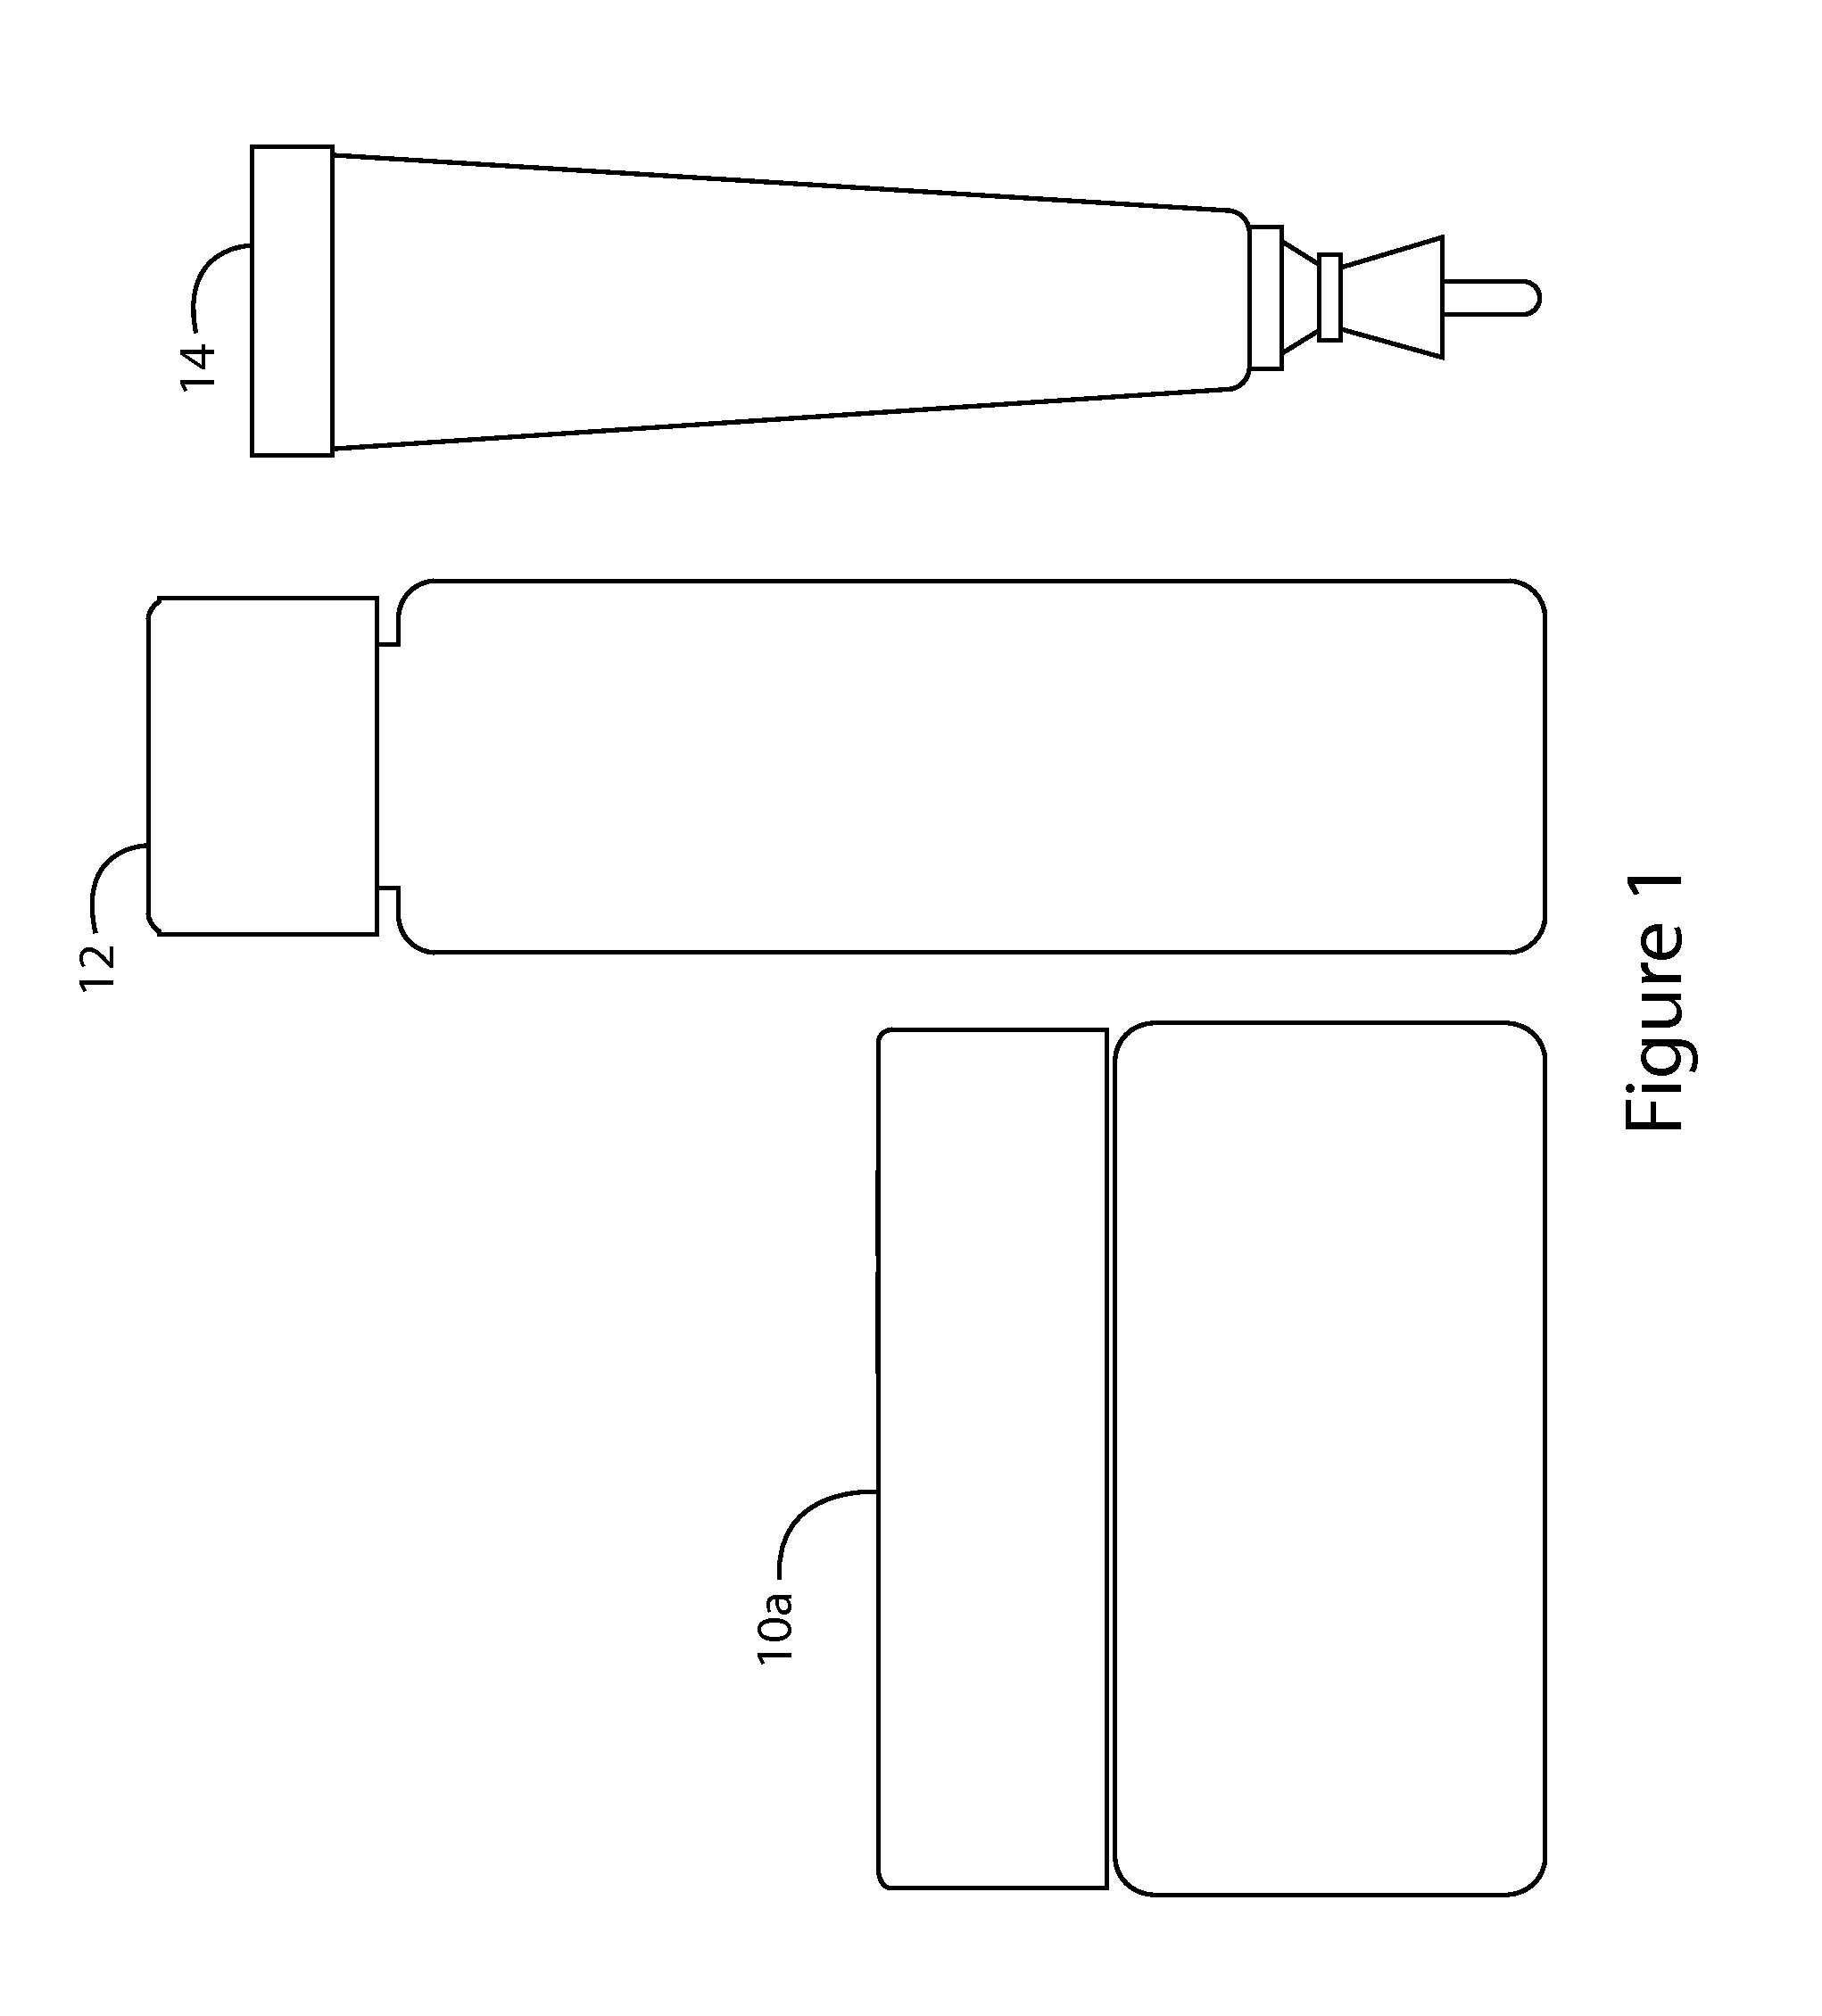 Water-Gel Emulsion Compositions and Methods